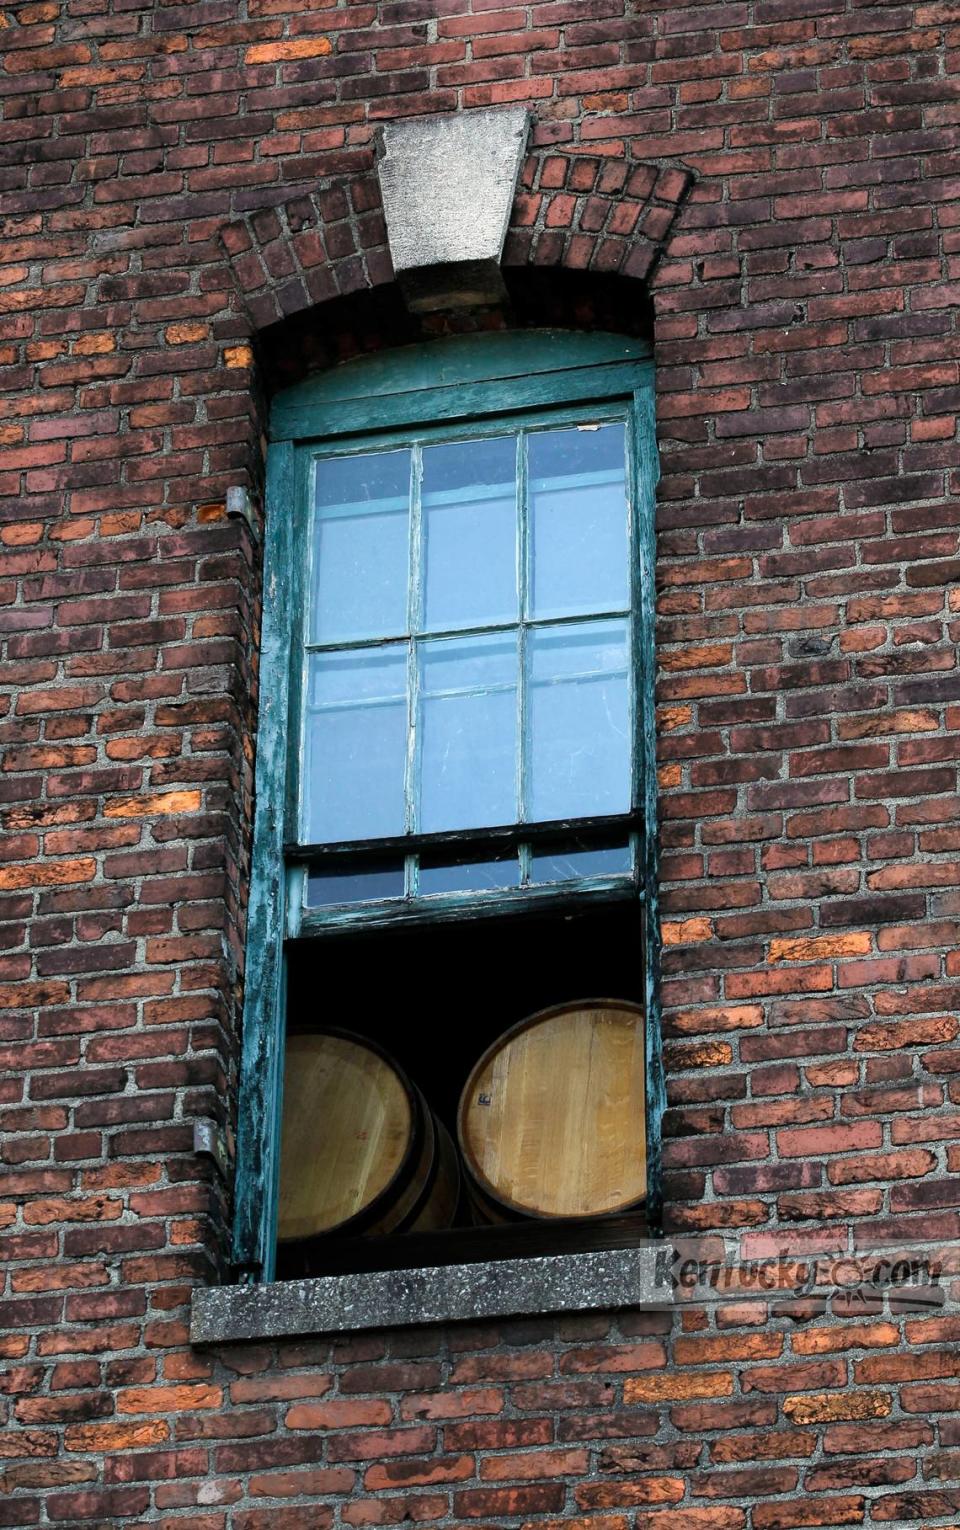 Barrels of bourbon aging at Buffalo Trace in Frankfort release fumes, known in the industry as “the angels’ share” that feed a black whiskey fungus. Neighbors of a potential new warehouse complex in Anderson County are worried about the fungus.